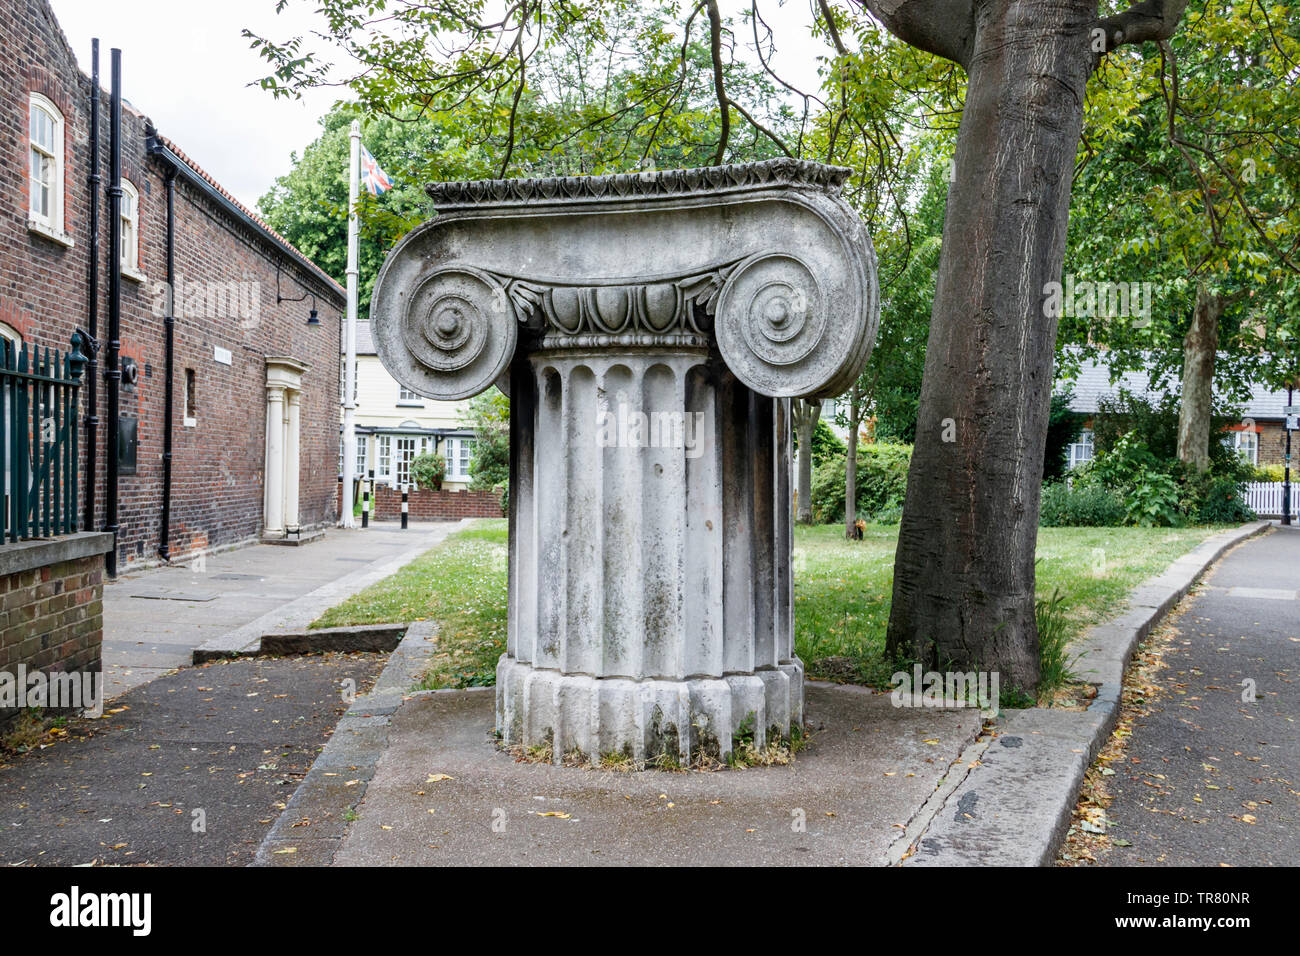 The capital of an ionic pillar outside Vestry House museum in Church Lane, Walthamstow, London, UK Stock Photo